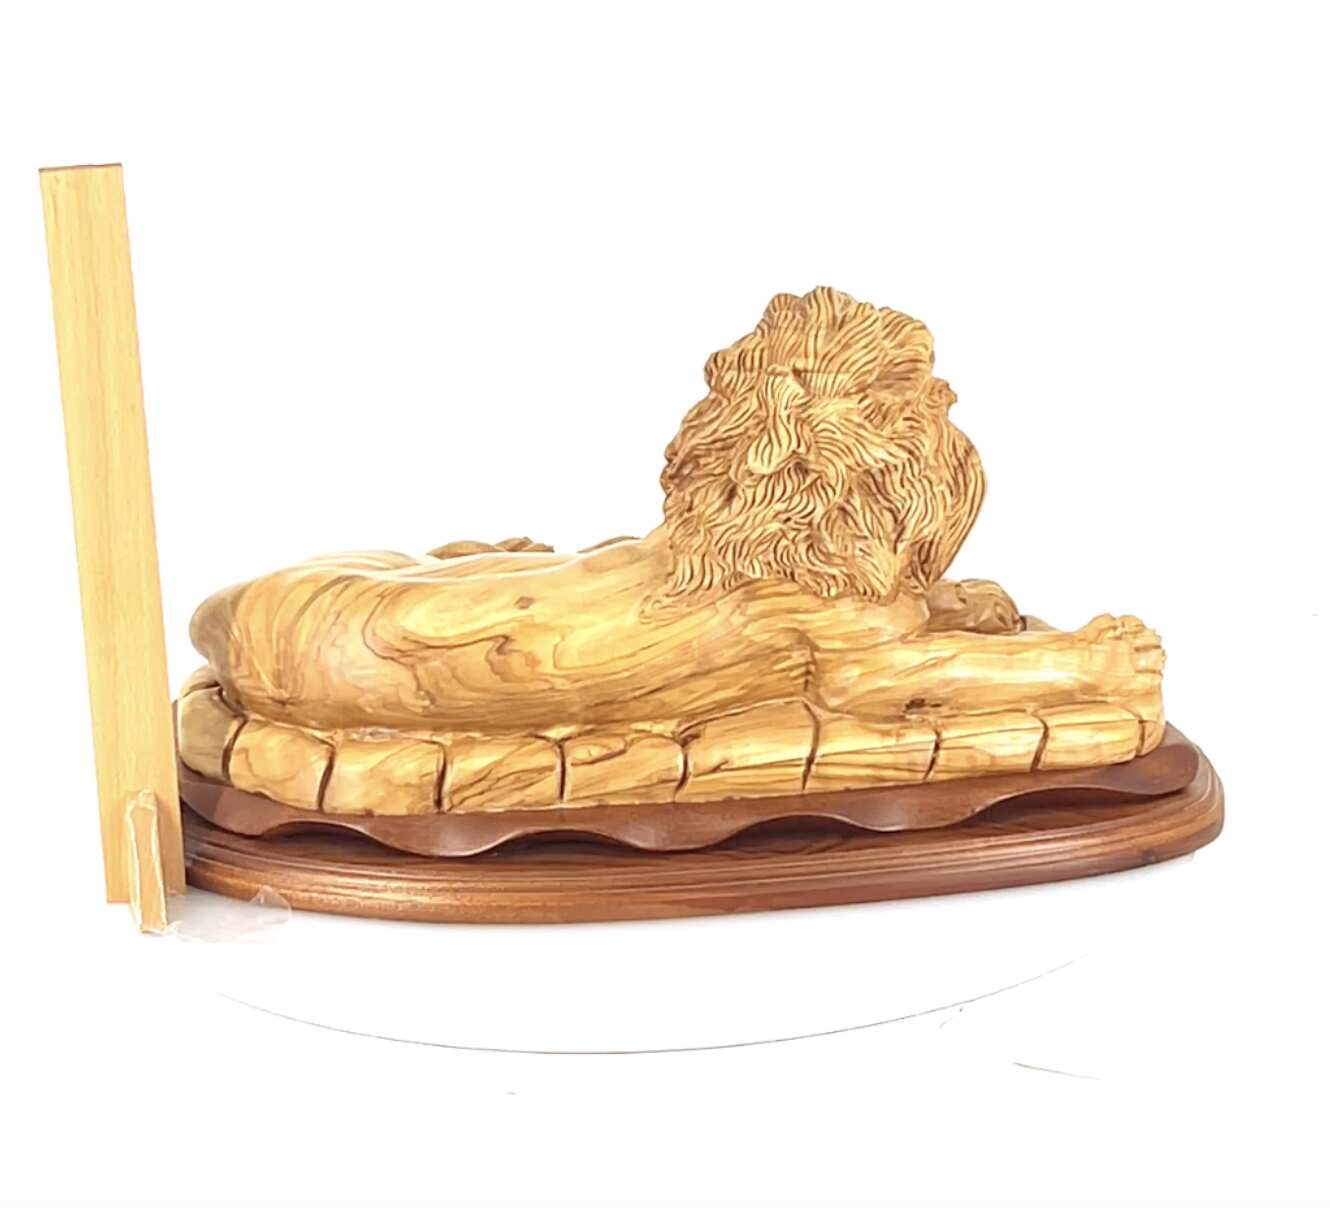 Lion with Lamb, Masterpiece Wooden Sculpture 19.7" Long